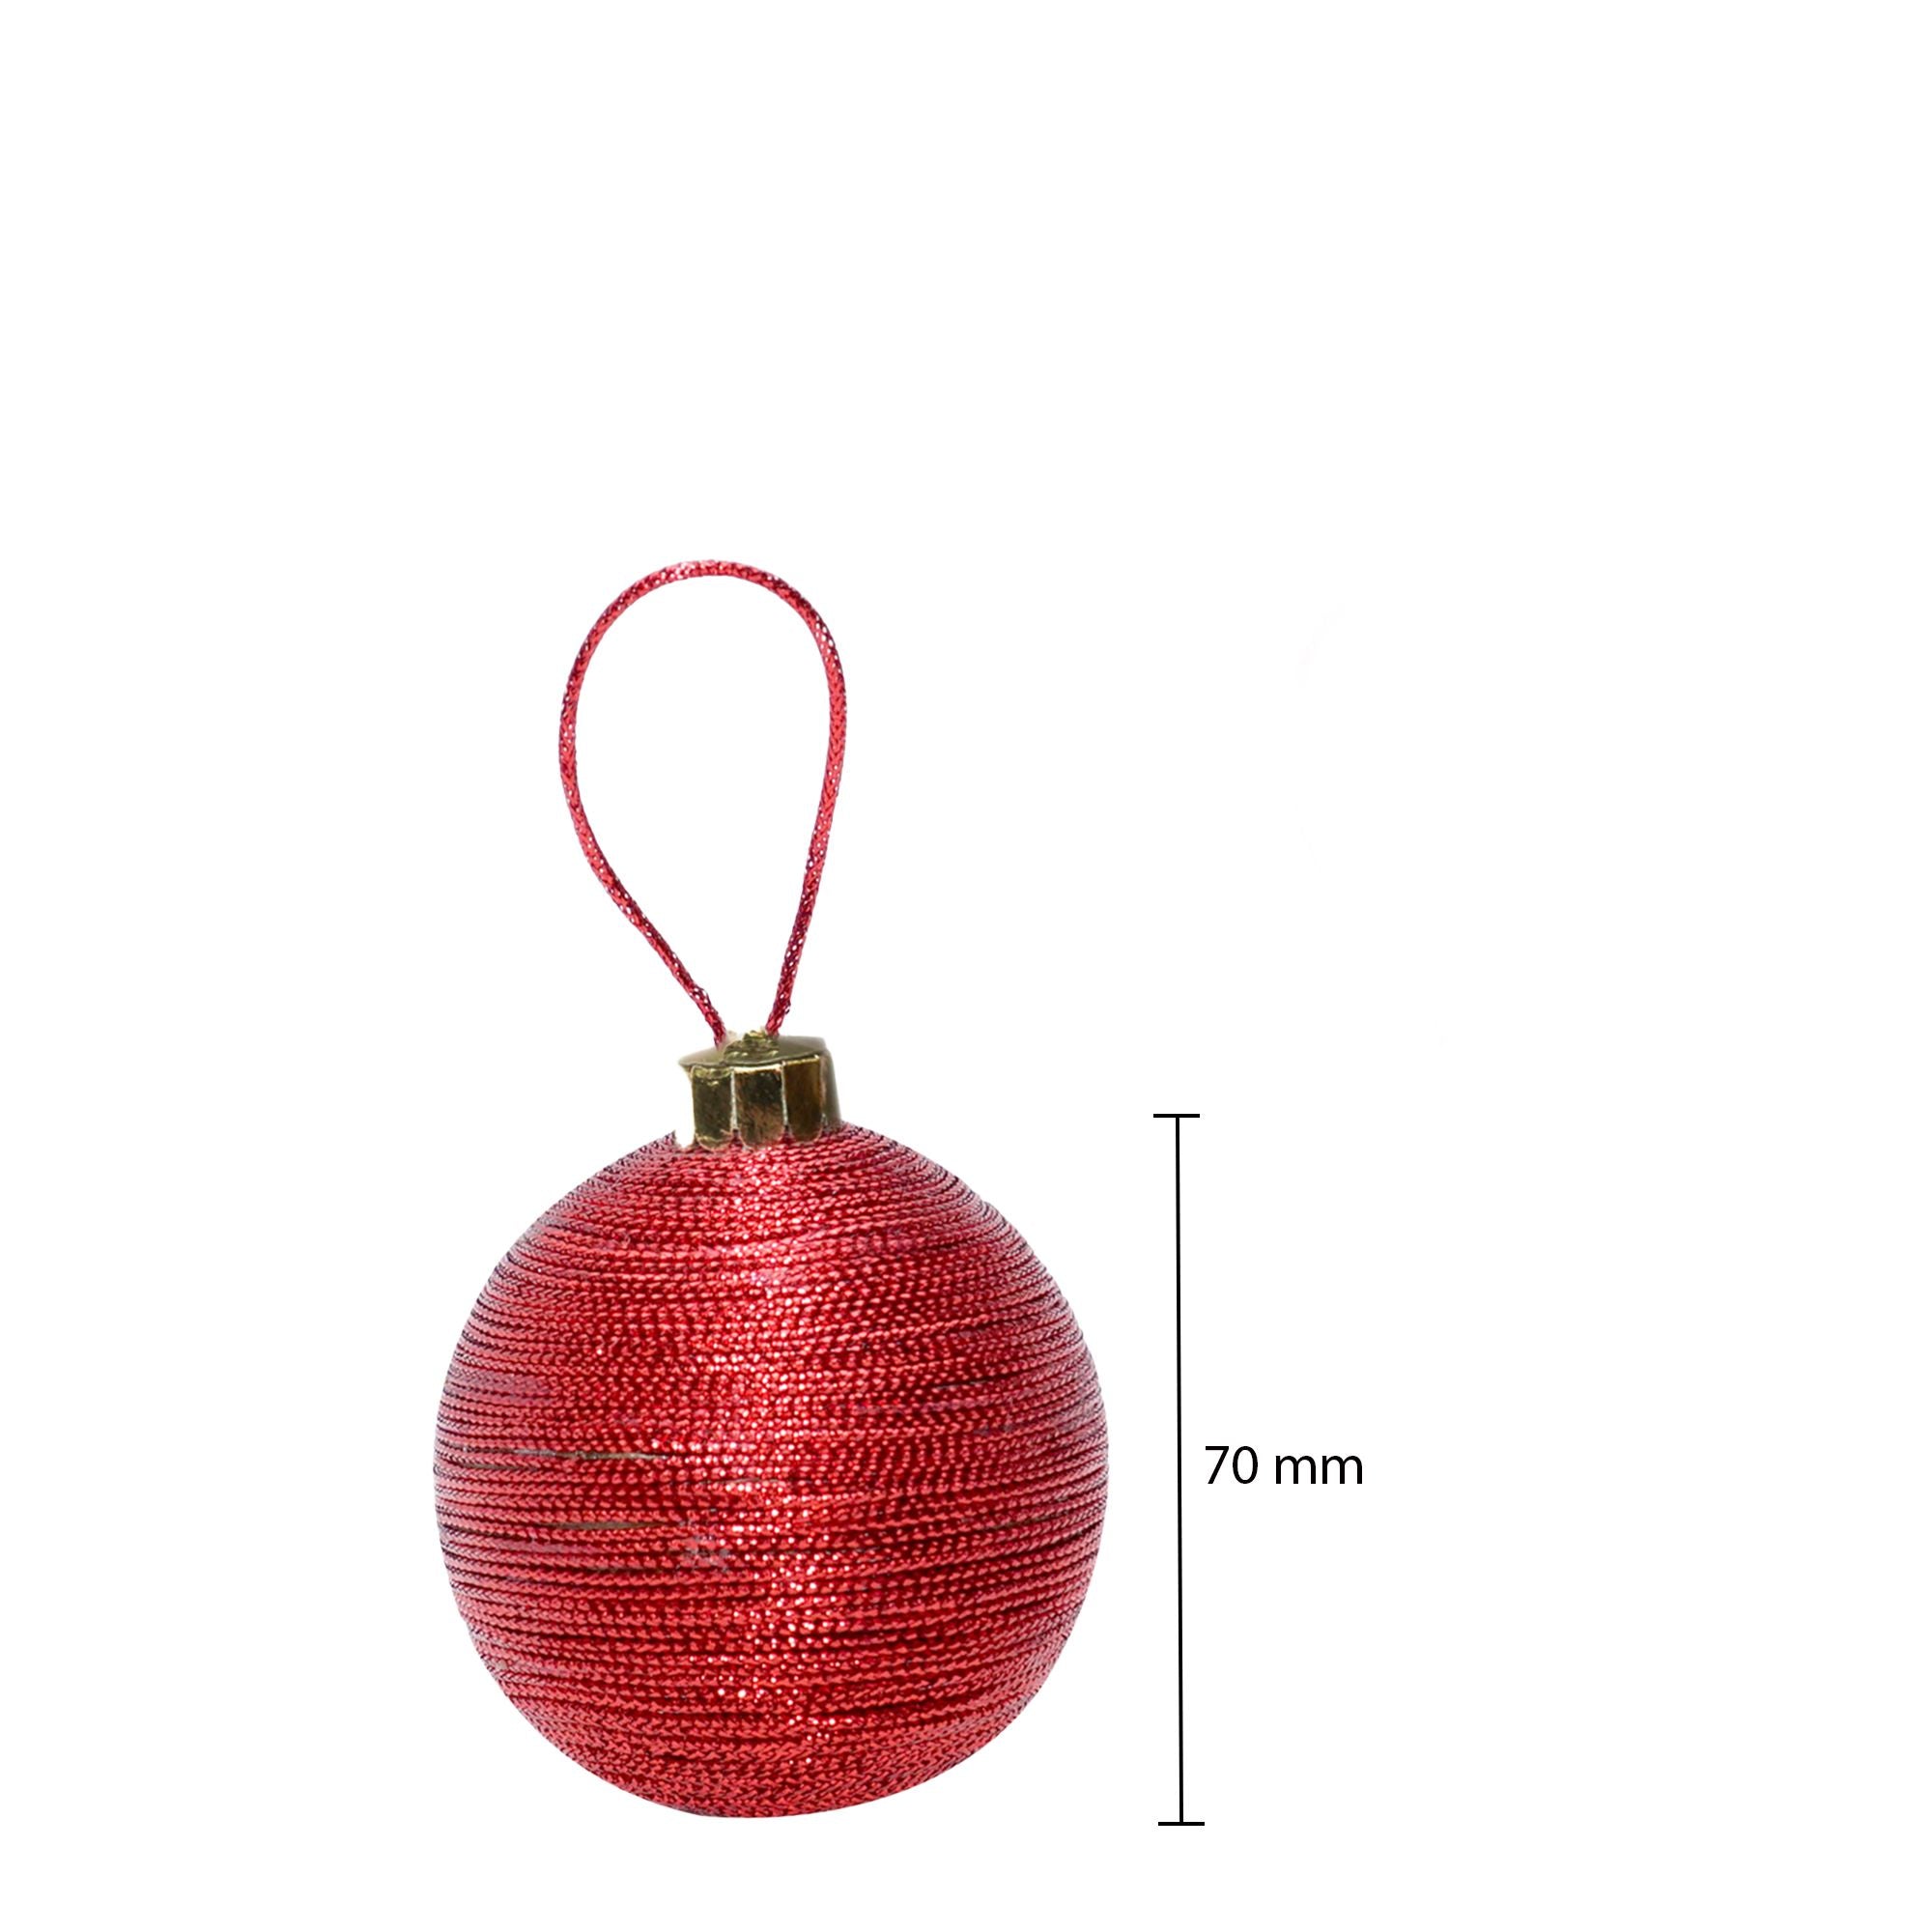 Handmade Christmas Ornaments - Lurex Baubles, 70mm, Red, 2pc